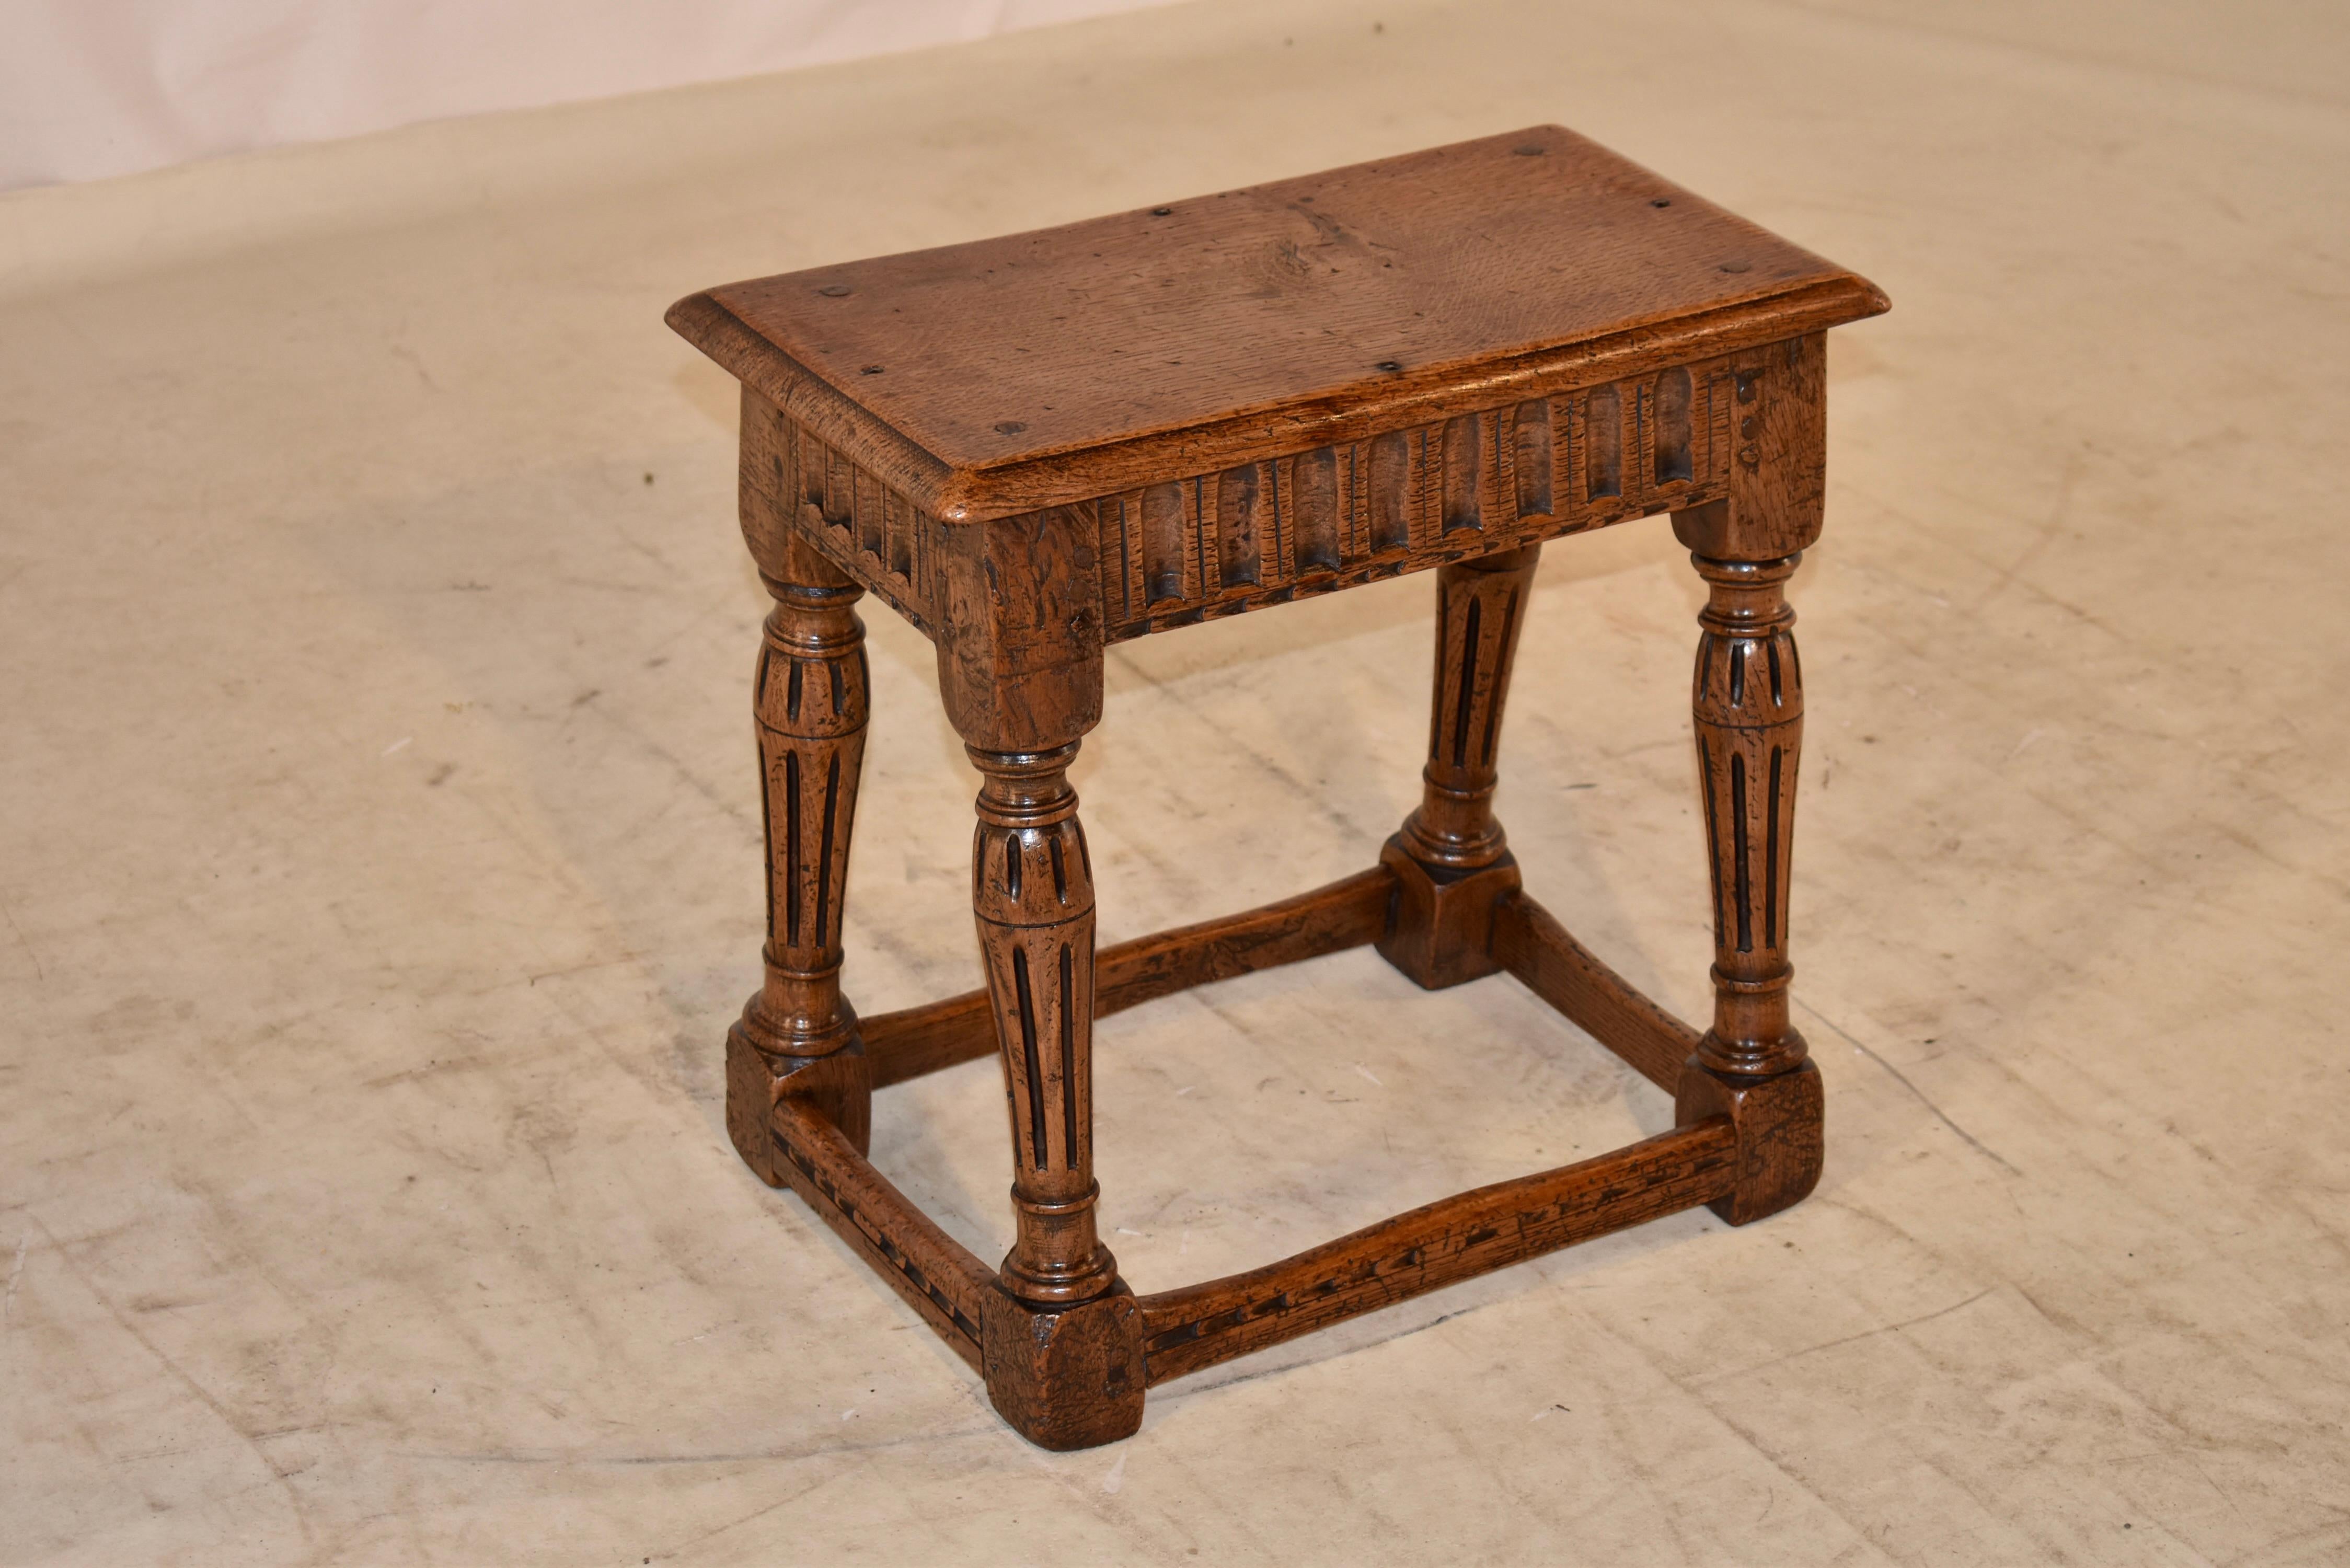 Early 18th century oak joint stool from England with a beveled edge around the top. The top is pegged and secured with hand made rose head nails to the base. The base has a hand carved apron in a nulled pattern, over hand turned and fluted legs,